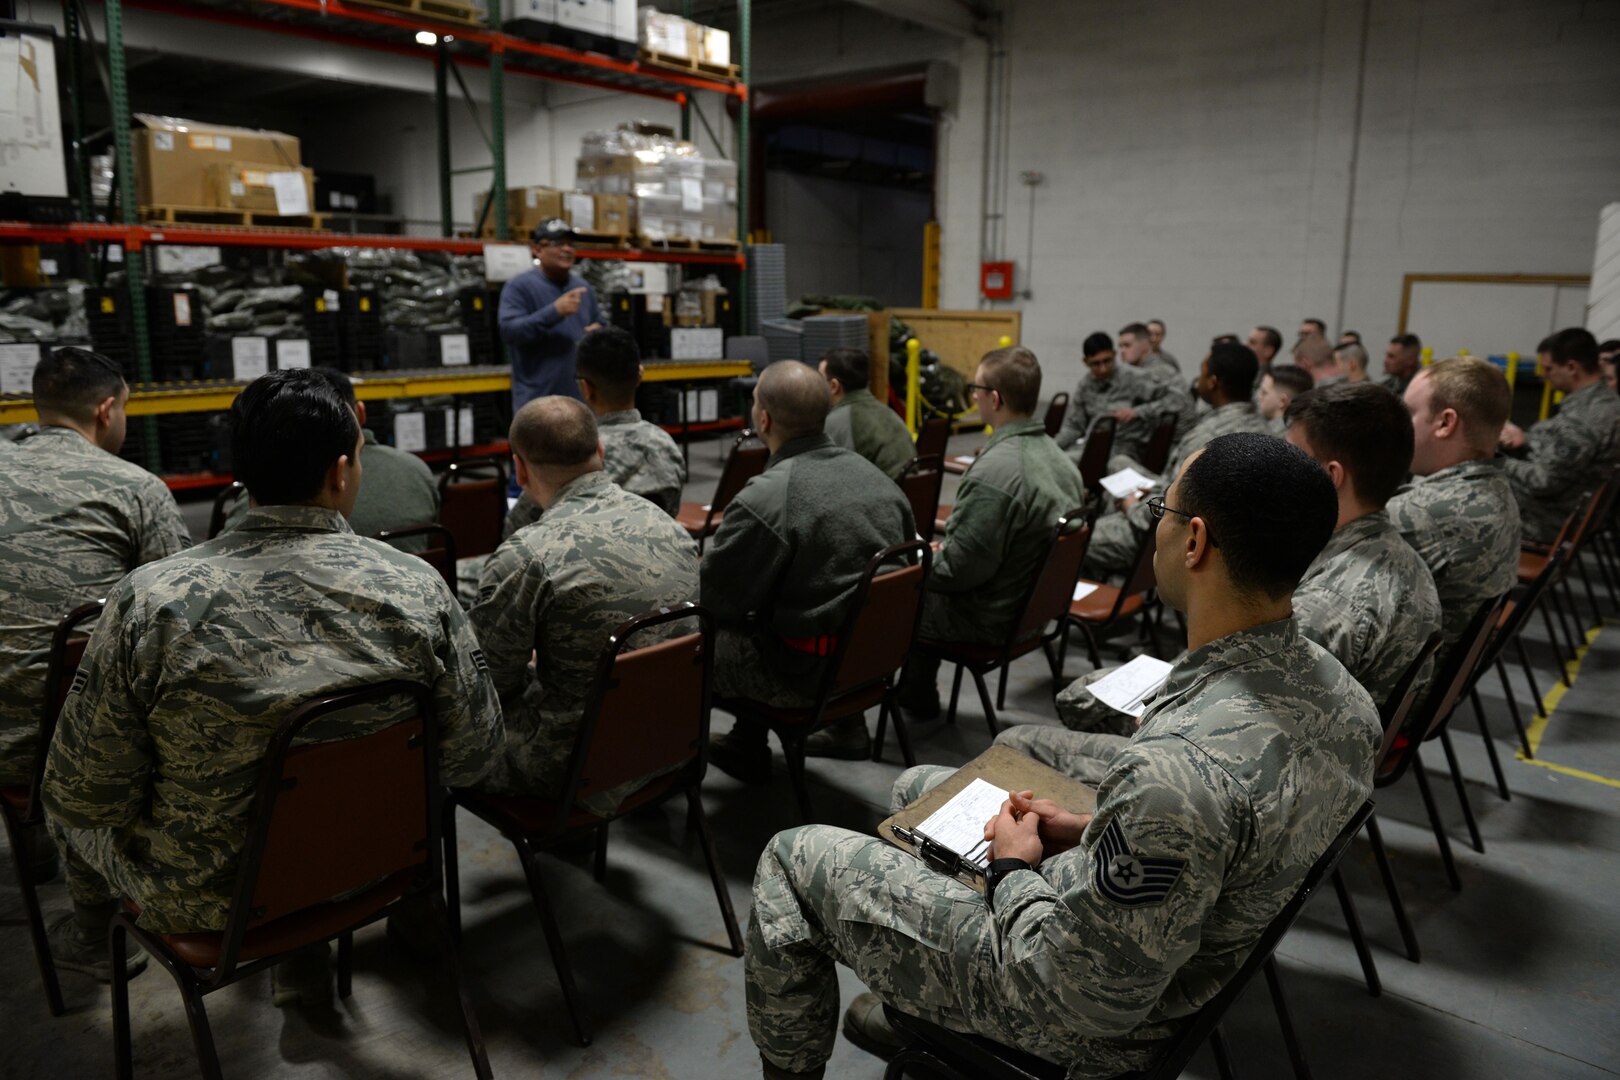 Johnny Foster, 673d Logistics Readiness Squadron Individual Protective Equipment Element Supervisor, speaks to Airmen regarding the issuing of IPE, Jan. 17, 2018, at Joint Base Elmendorf-Richardson, Alaska. IPE takes account of the storage, inventory, inspection, and issue of mobility bags, and base mobility small arms/light weapons.